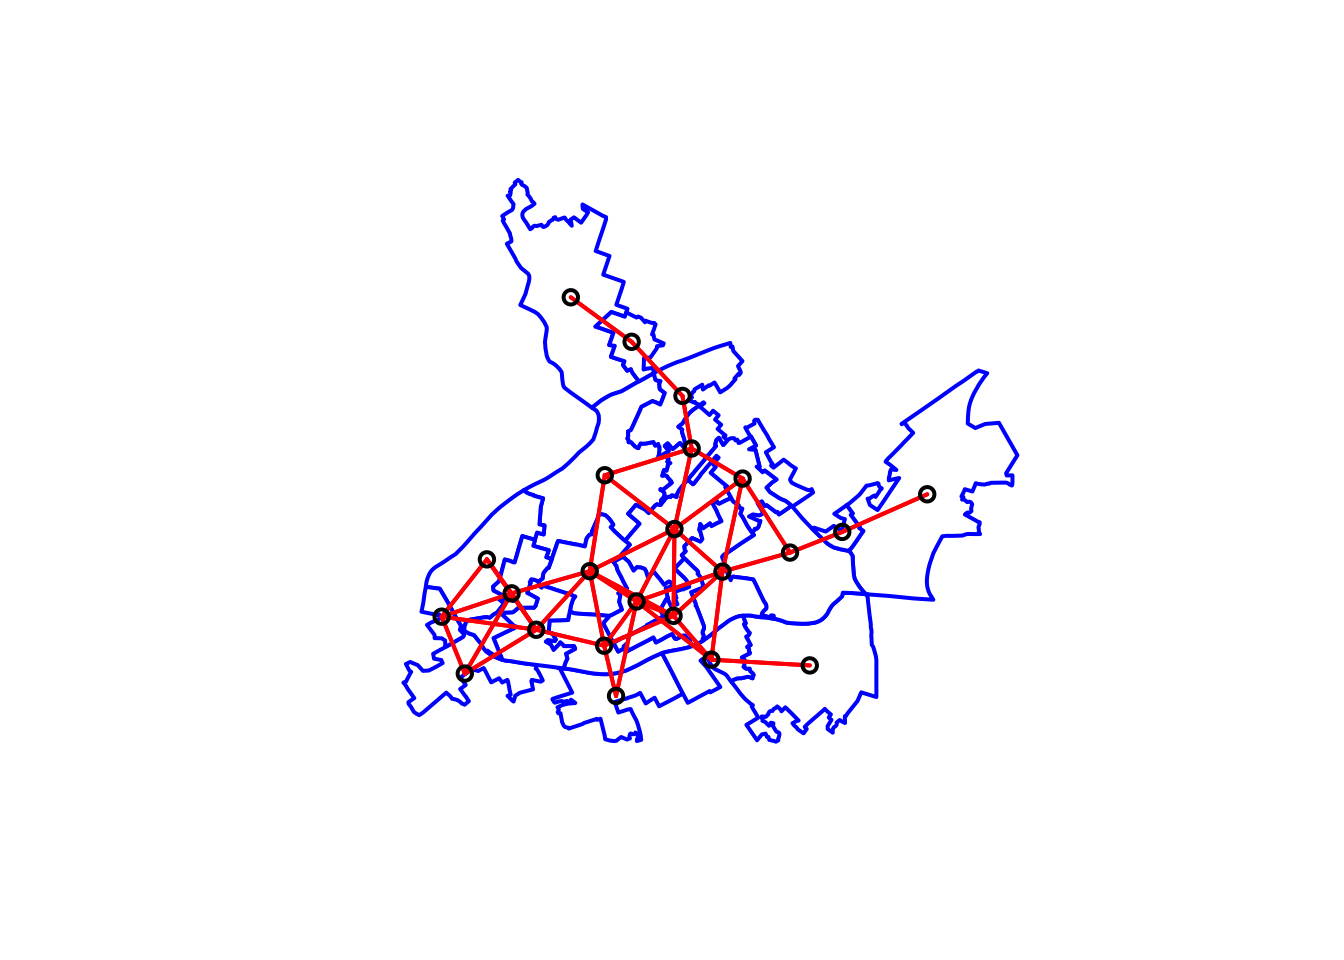 Like in the previous figure, LSOAs from Manchester have been outlined in blue, with a small black circle in the centre of each one. Many of the longer red lines have been culled from before, and do not appear. The LSOA to the far north, and two to the east only have one neighbour now.